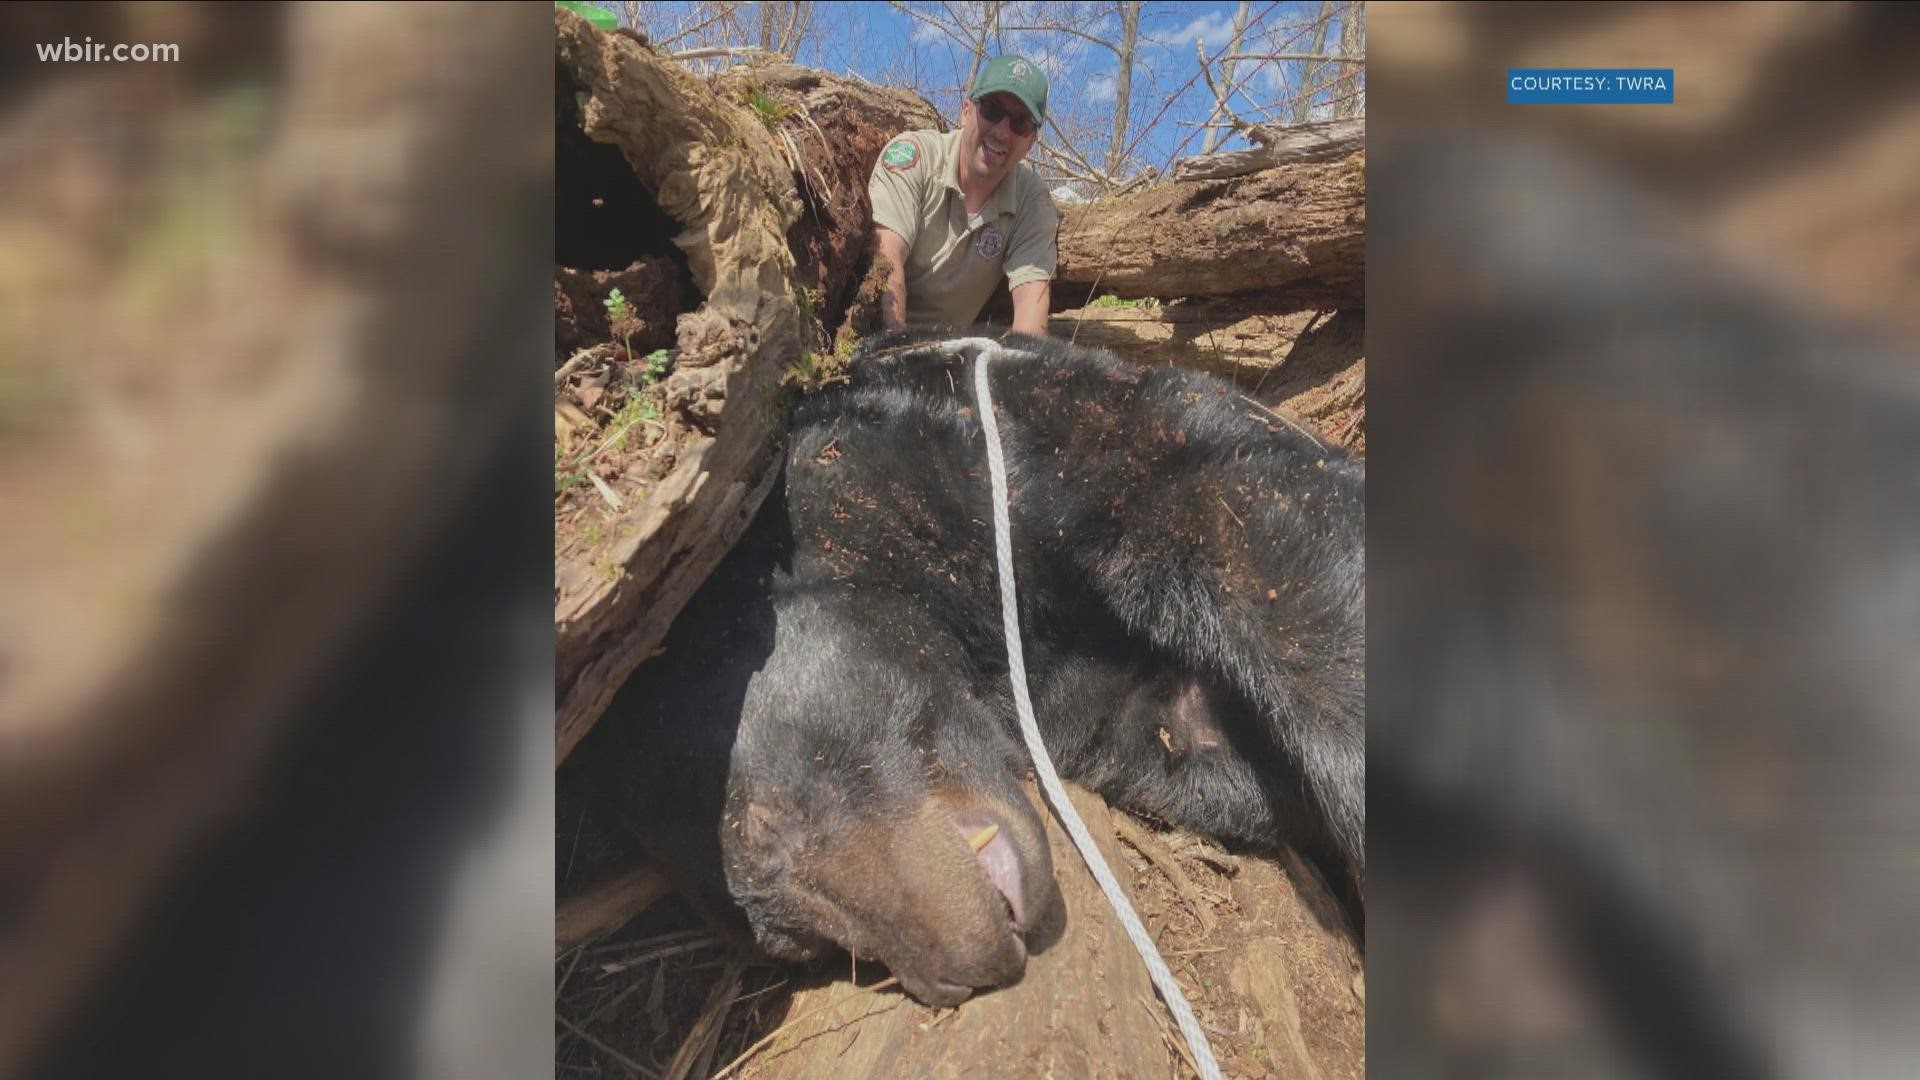 The TWRA said the bear had grown too comfortable with people and had become habituated, saying it had caused property damage last year.